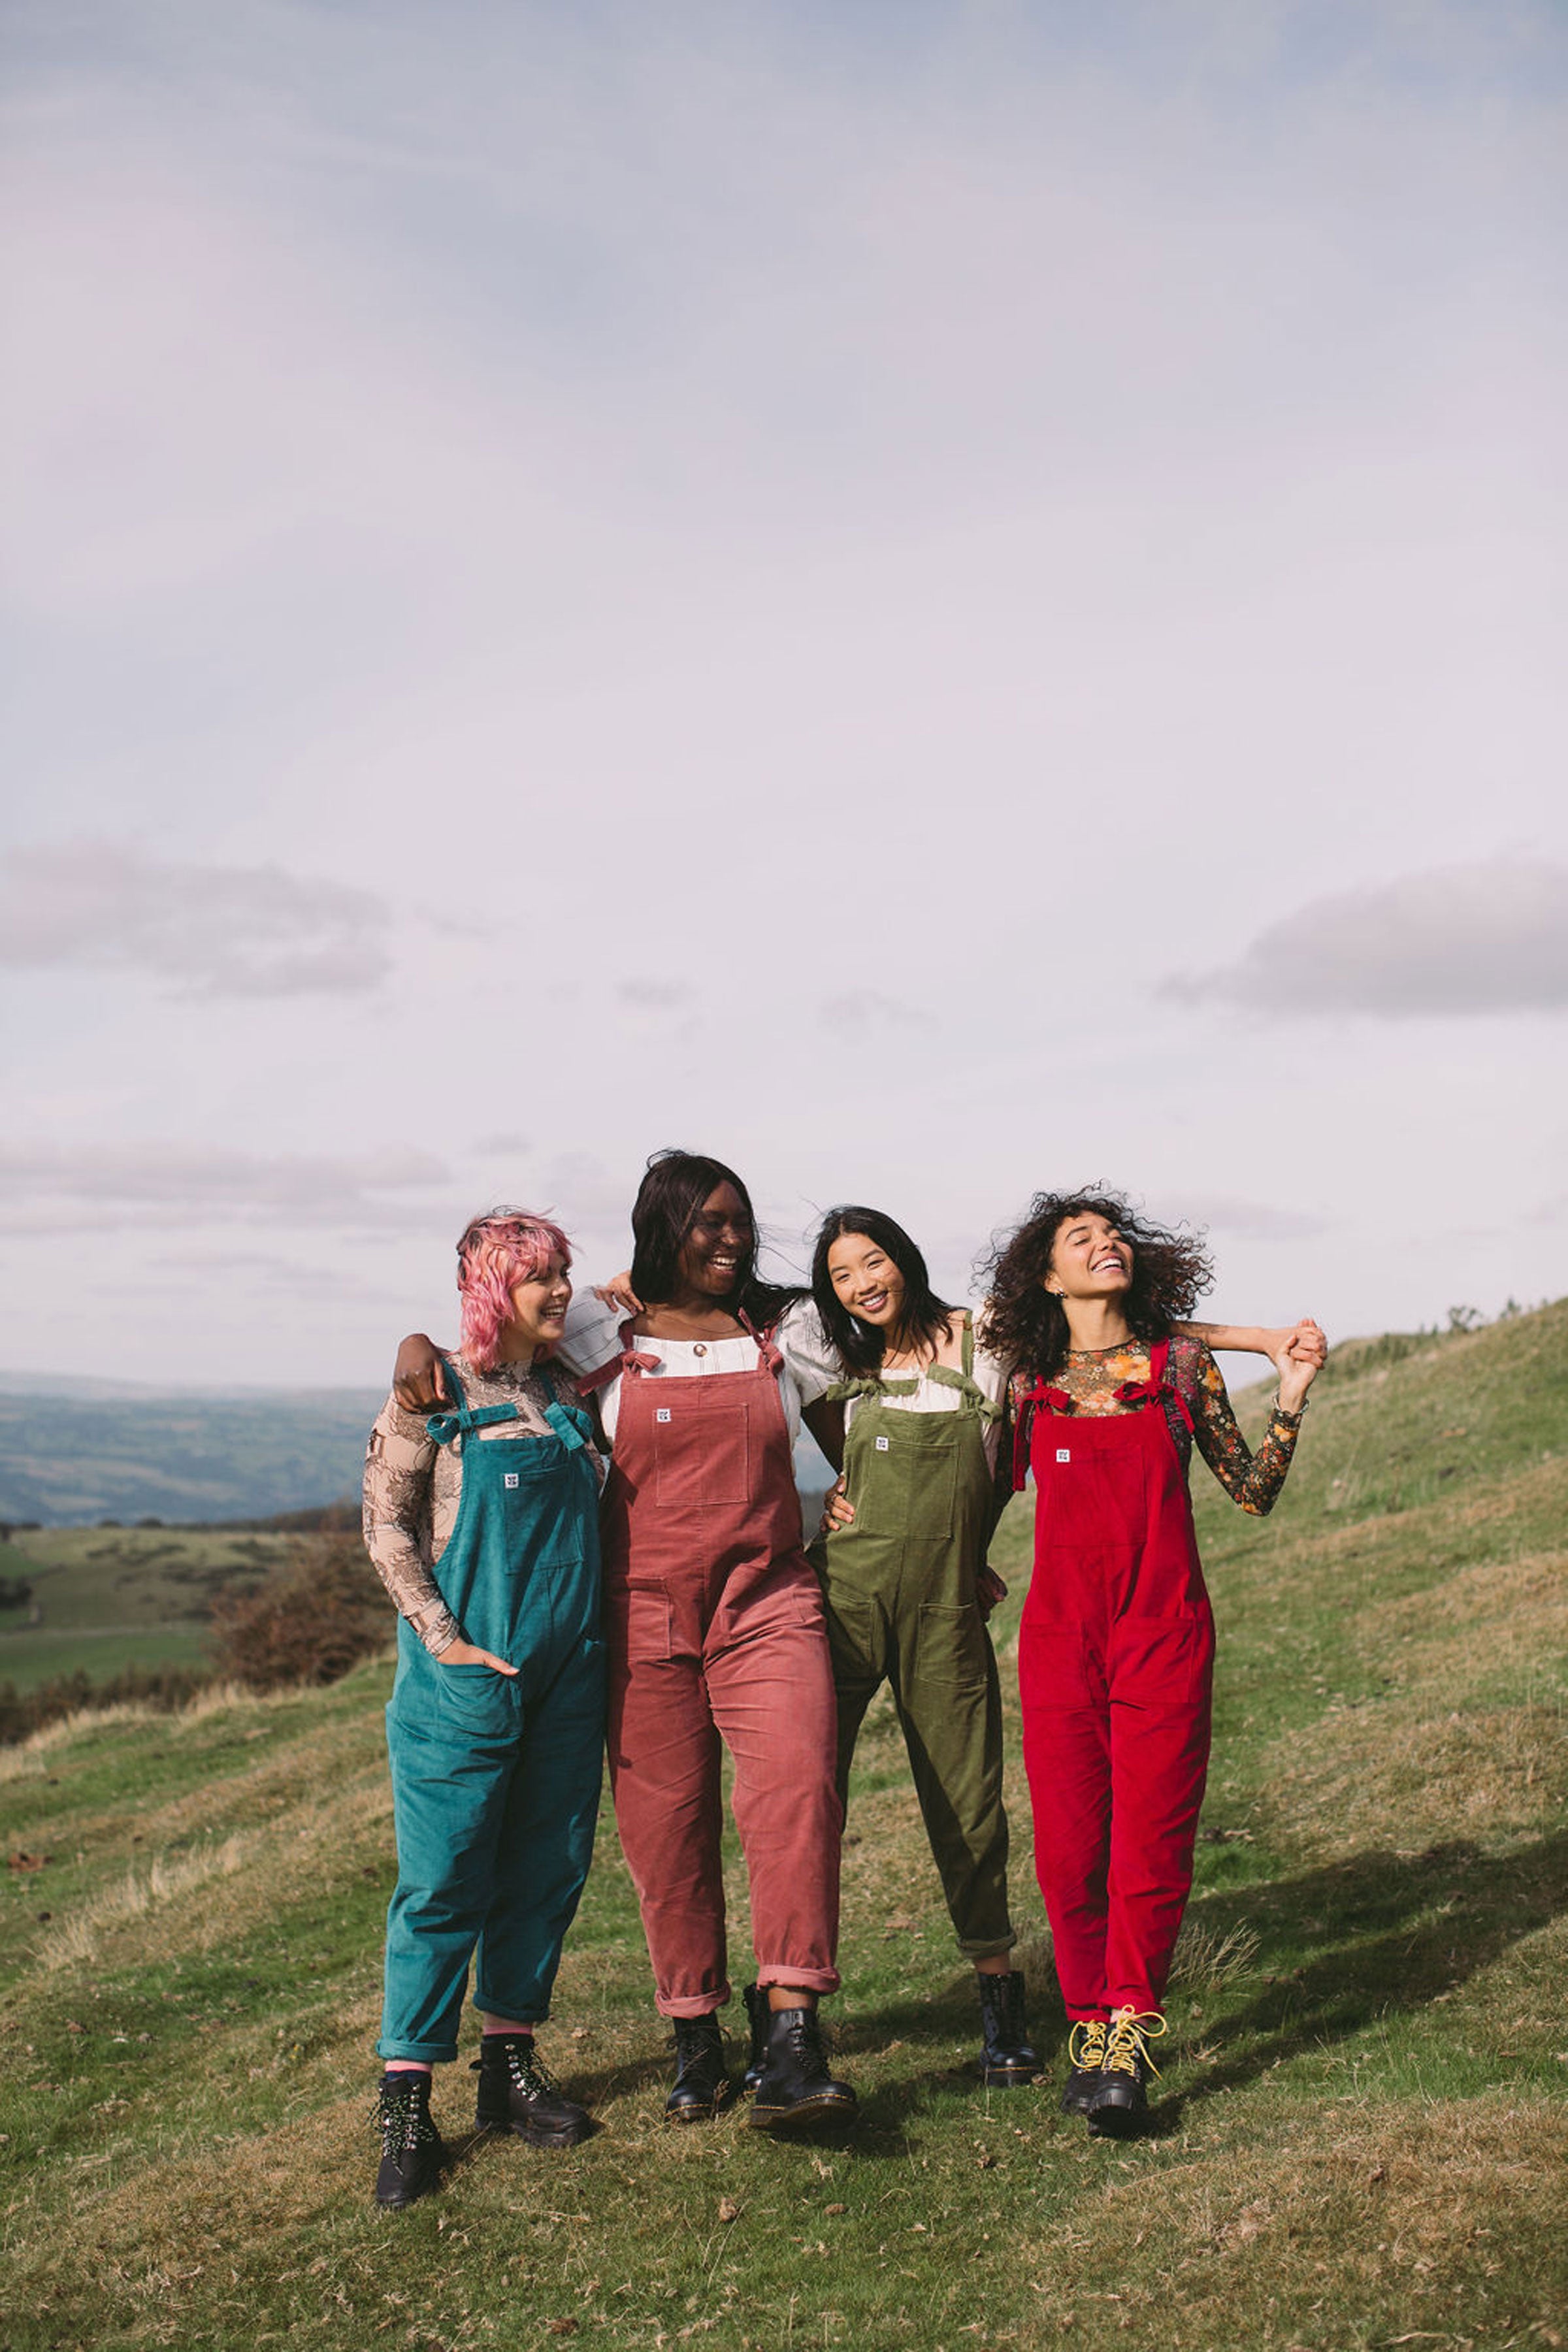 Meet Lucy & Yak, The Sustainable Fashion Brand